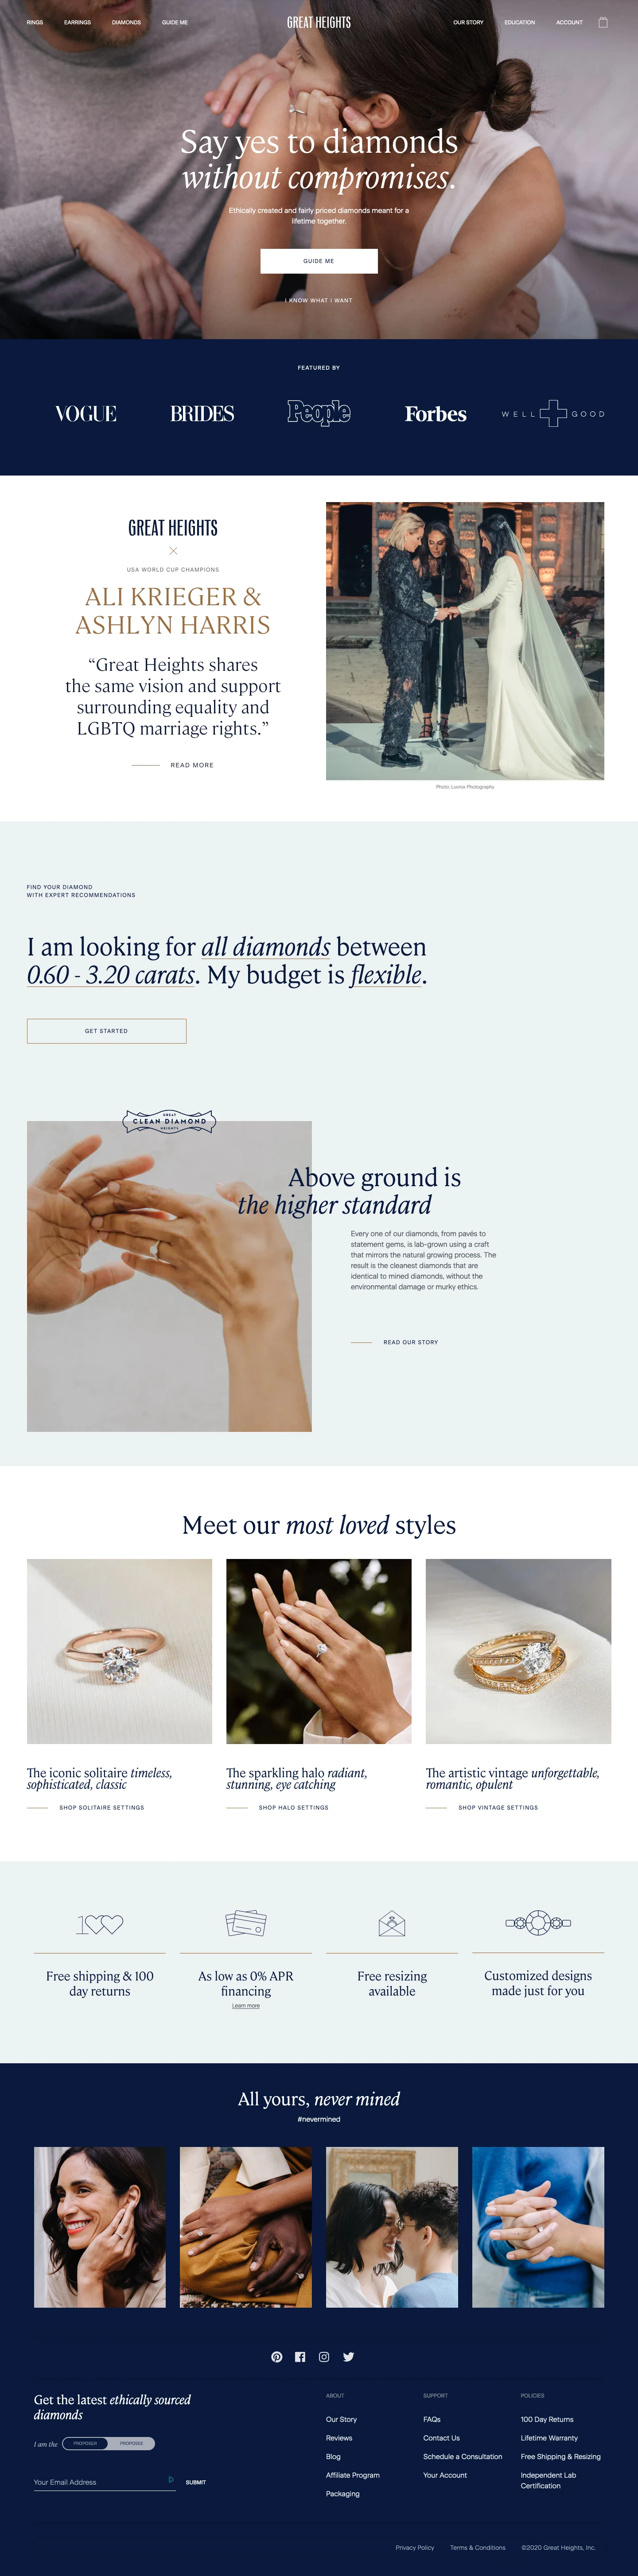 Great Heights Landing Page Example: Ethically created and fairly priced lab-grown diamonds meant for a lifetime together. Experience the difference of a clean diamond with Great Heights.